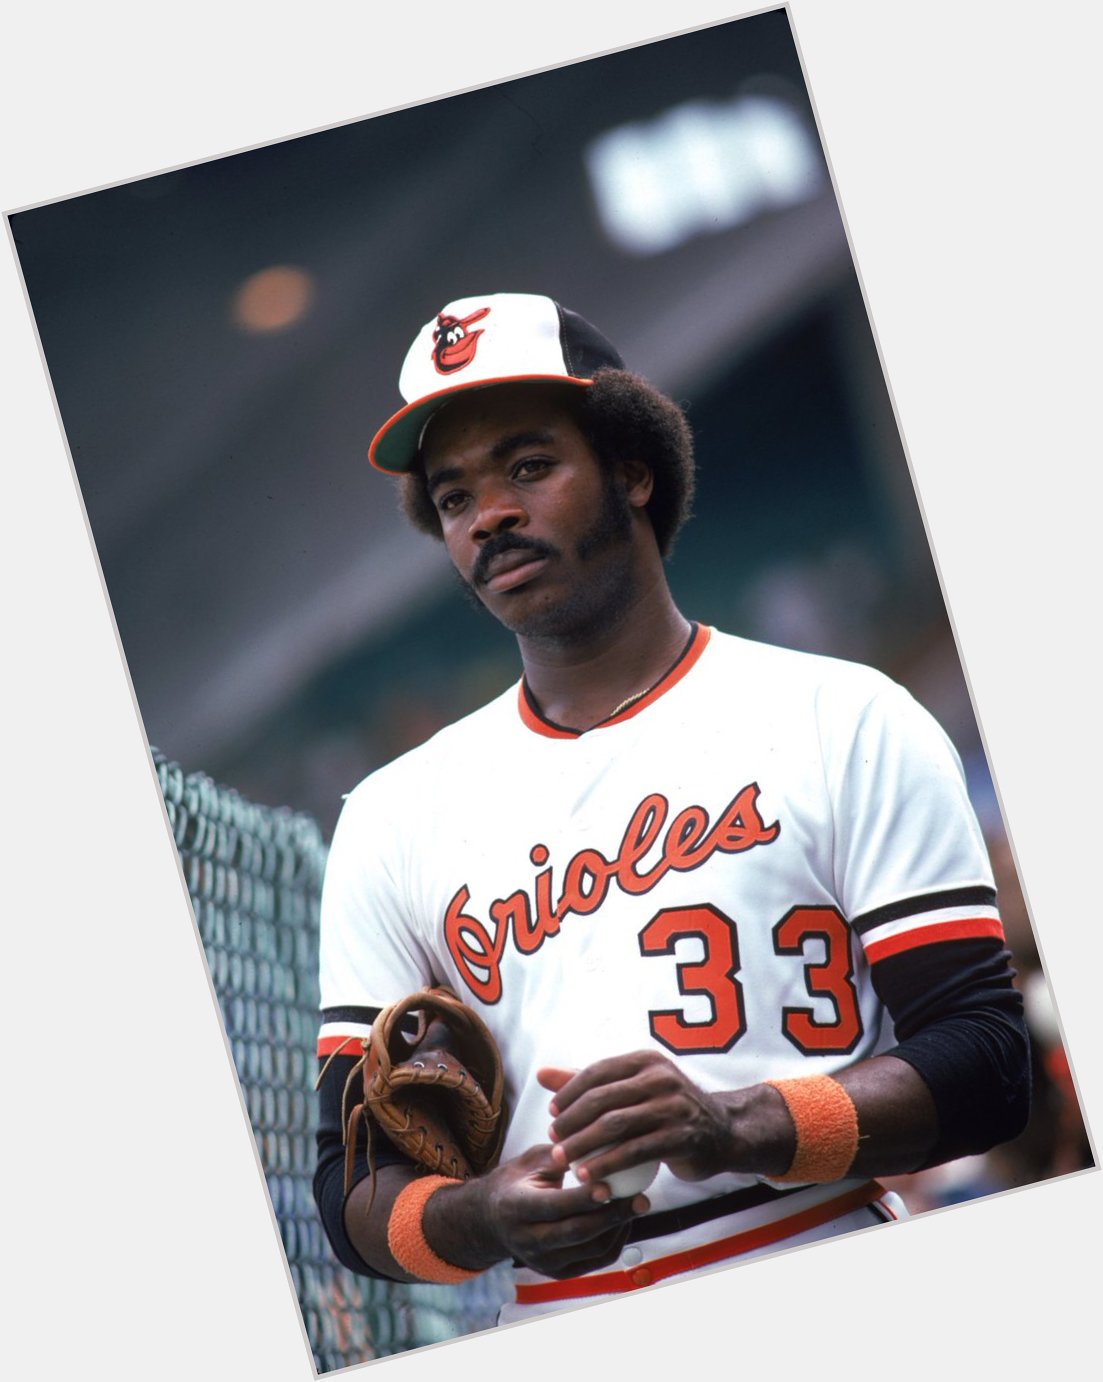 Happy birthday to the great Eddie Murray 